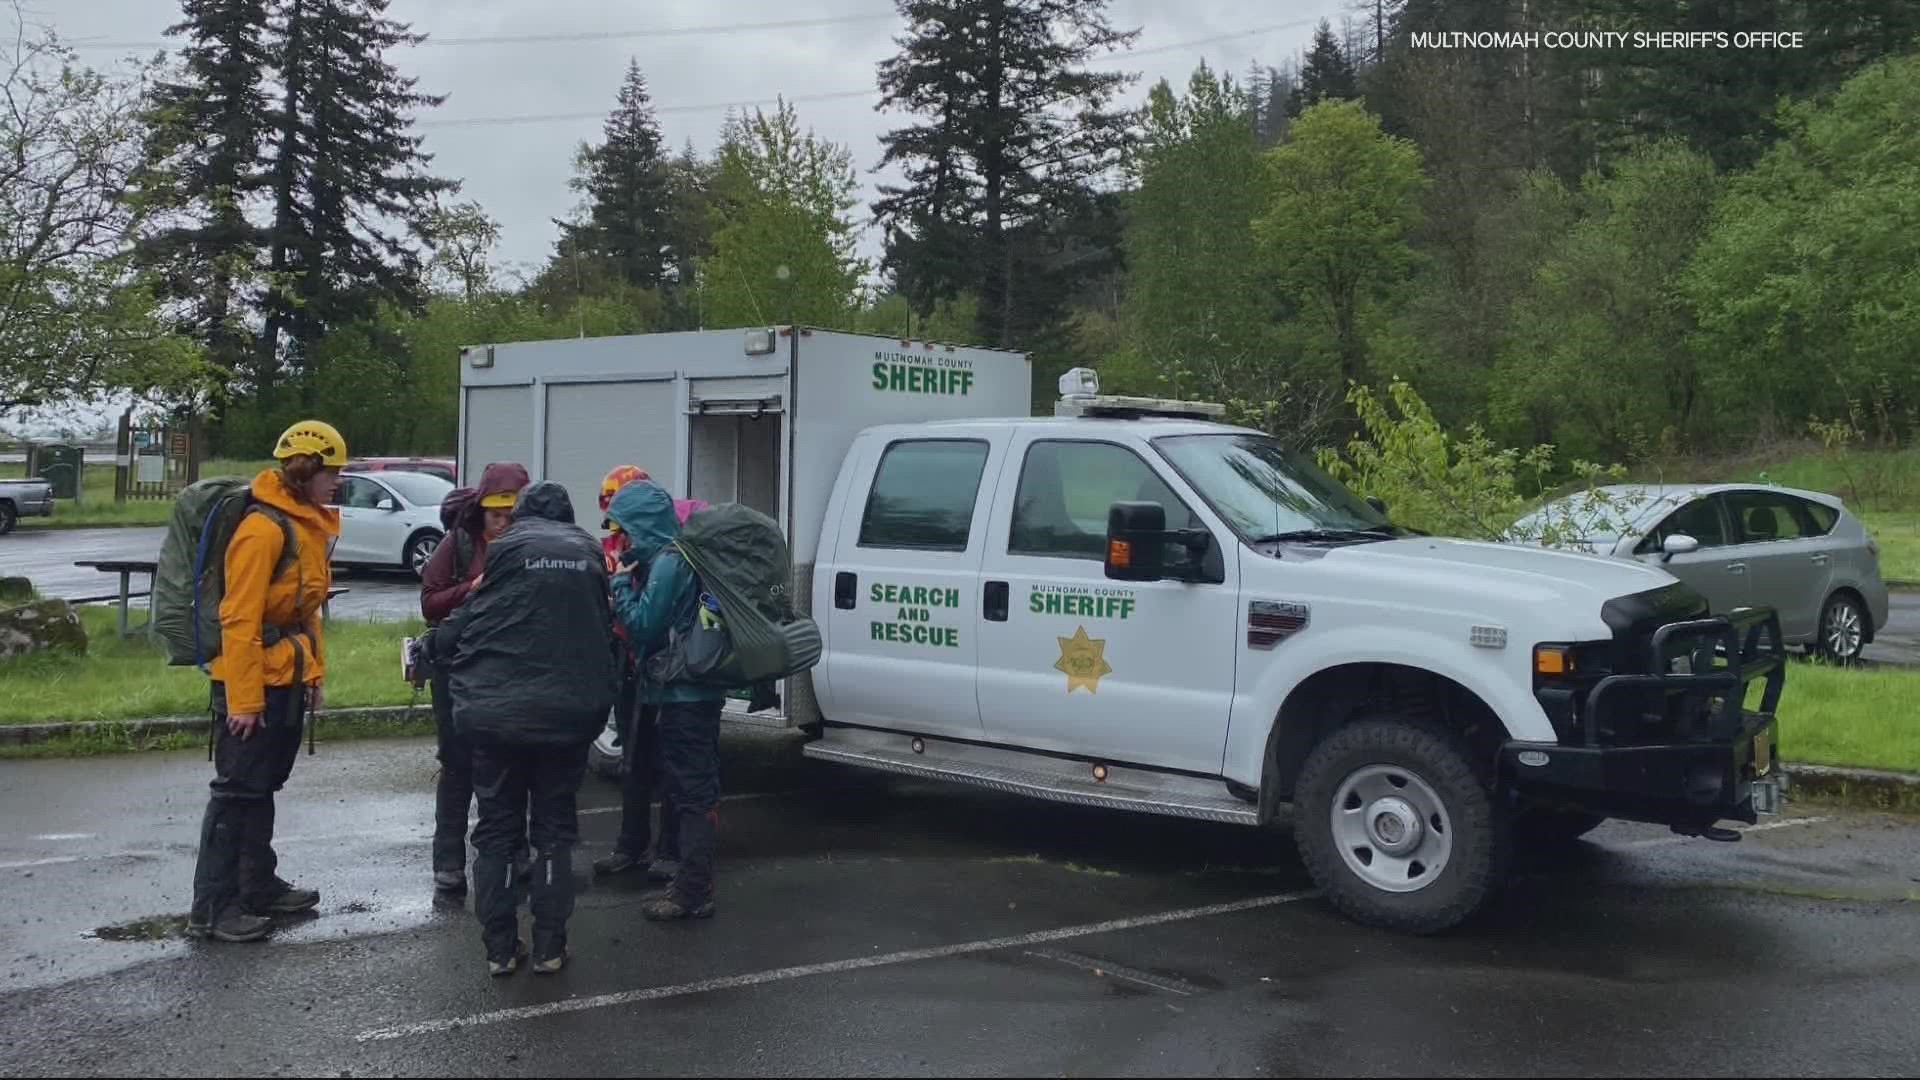 The Multnomah County Sheriff's Office dispatched teams after someone noticed a signal fire from the stranded hiker.